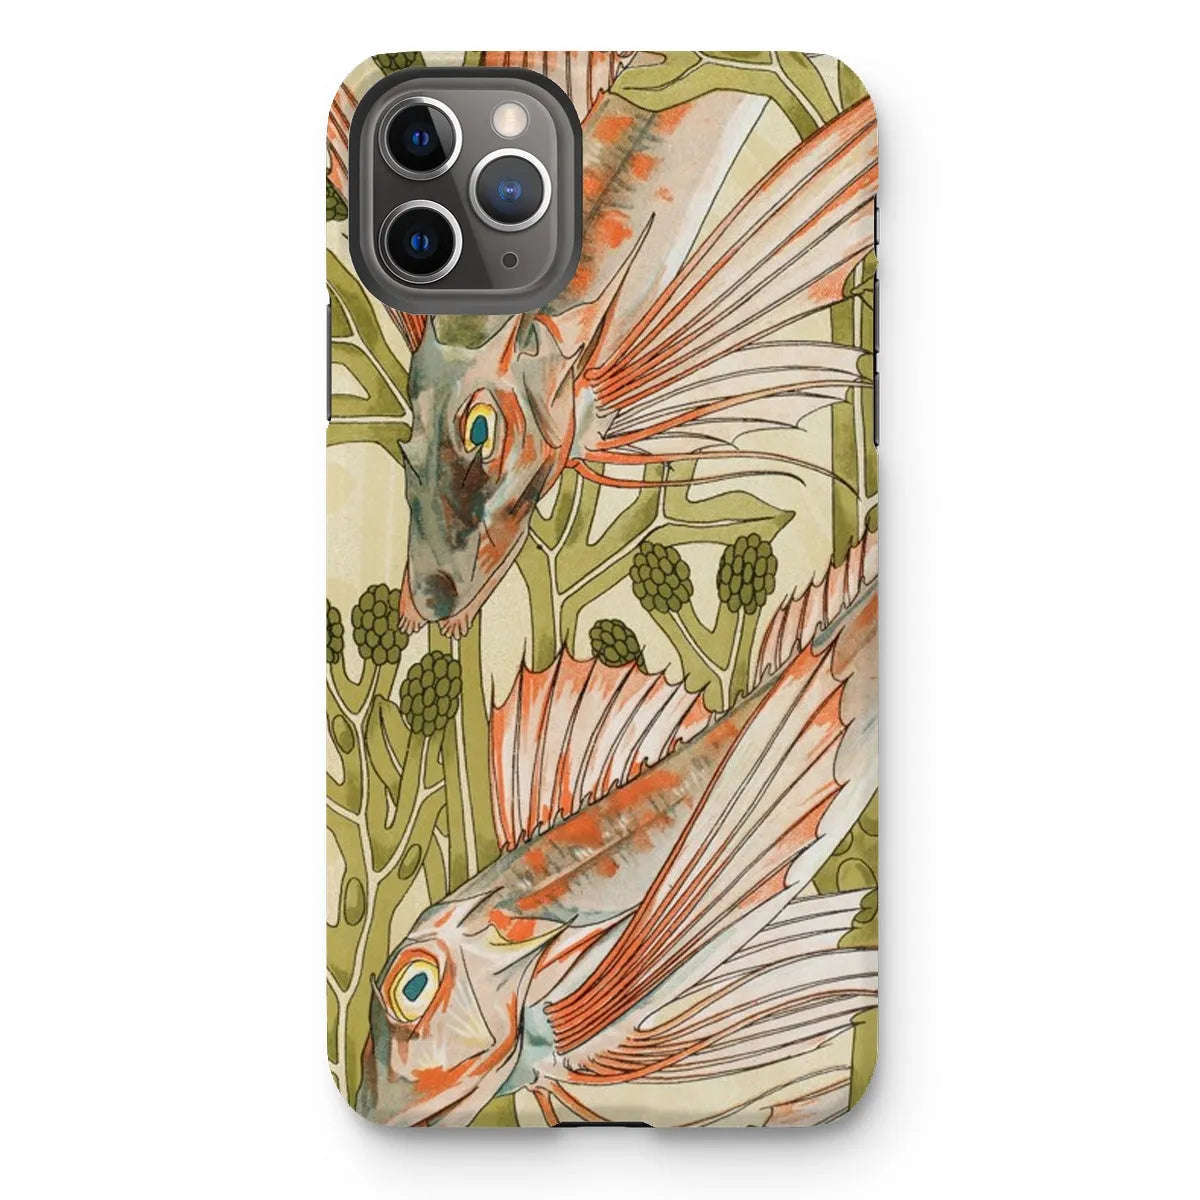 Red Fish - Animal Art Phone Case - Maurice Pillard Verneuil - Iphone 11 Pro Max / Matte - Mobile Phone Cases